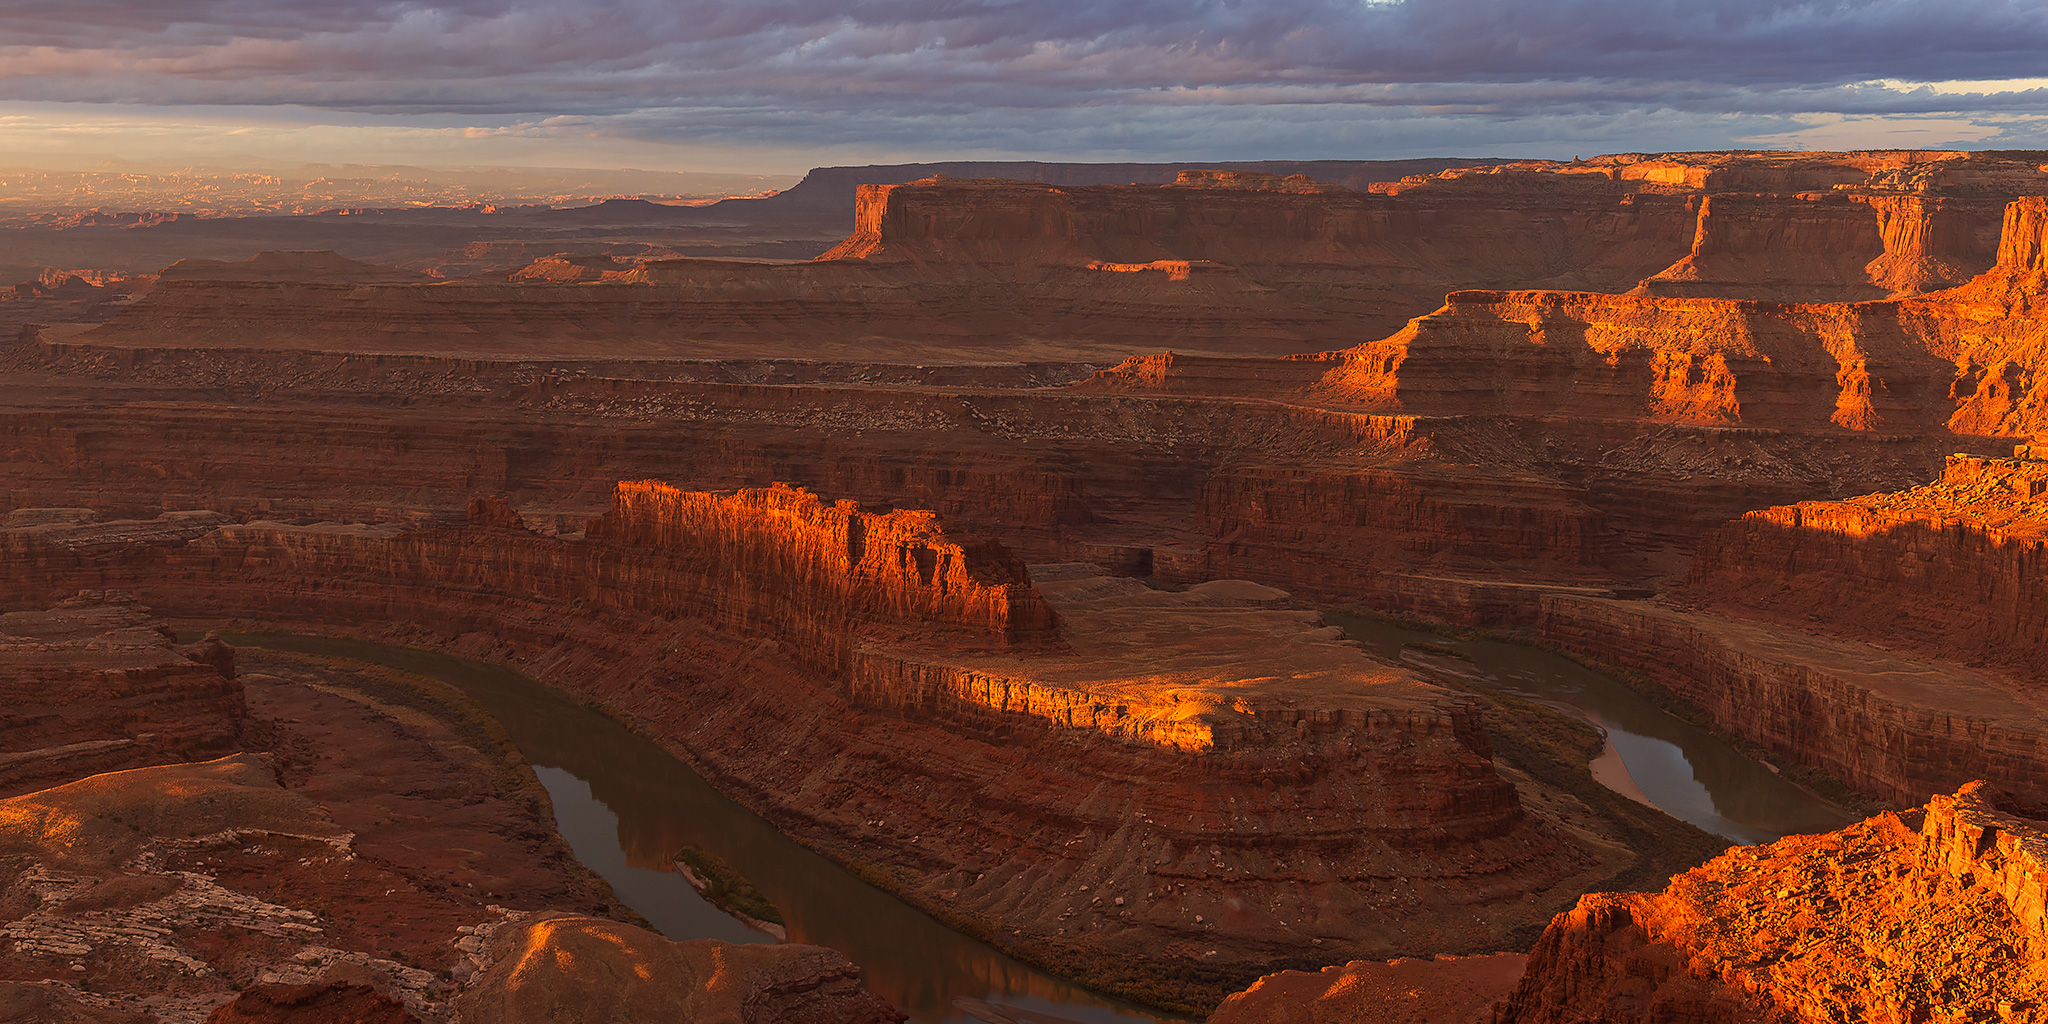 The Rim Trails at Dead Horse Point State Park